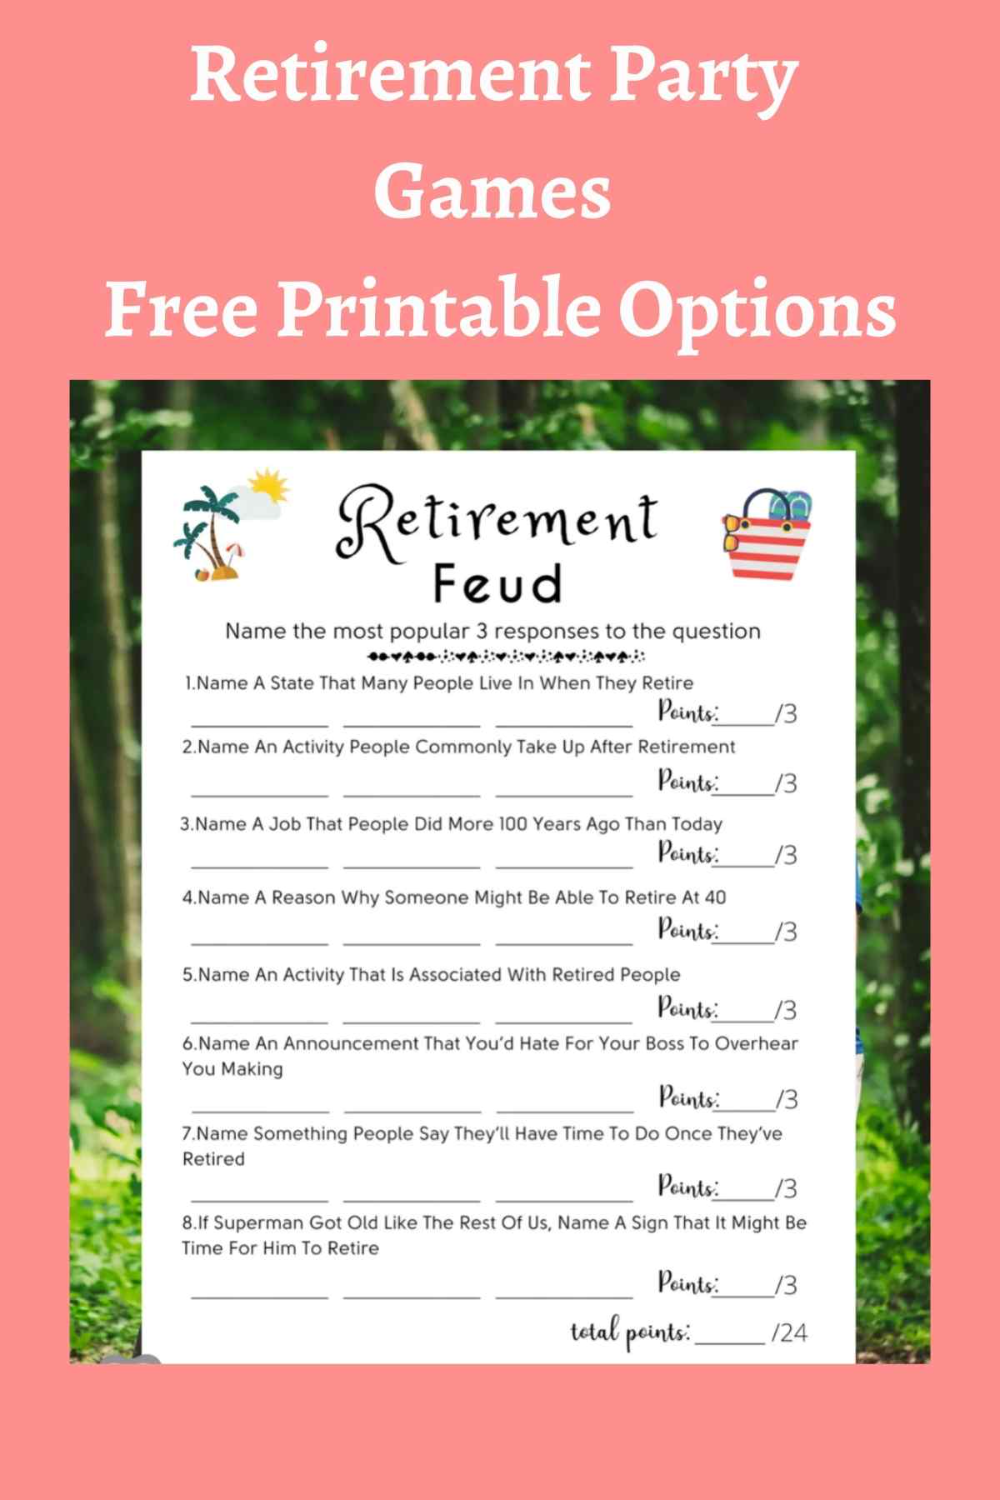 Retirement party games free printable options